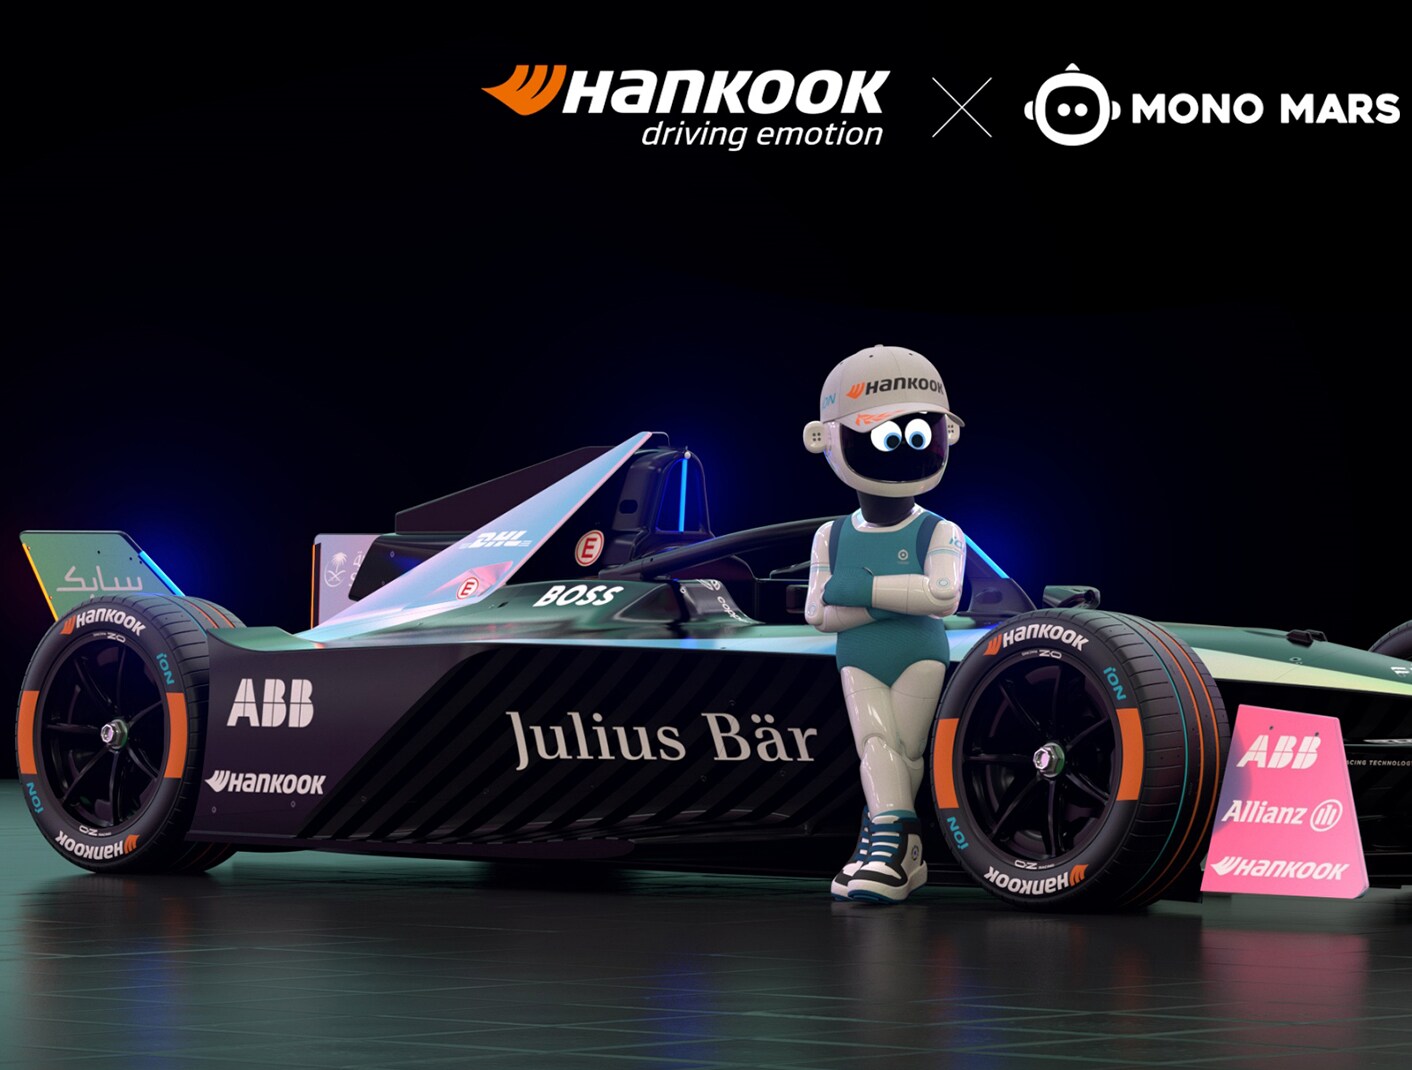 Hankook Tire joins hands with virtual influencer ‘Mono Mars’ to support Formula E